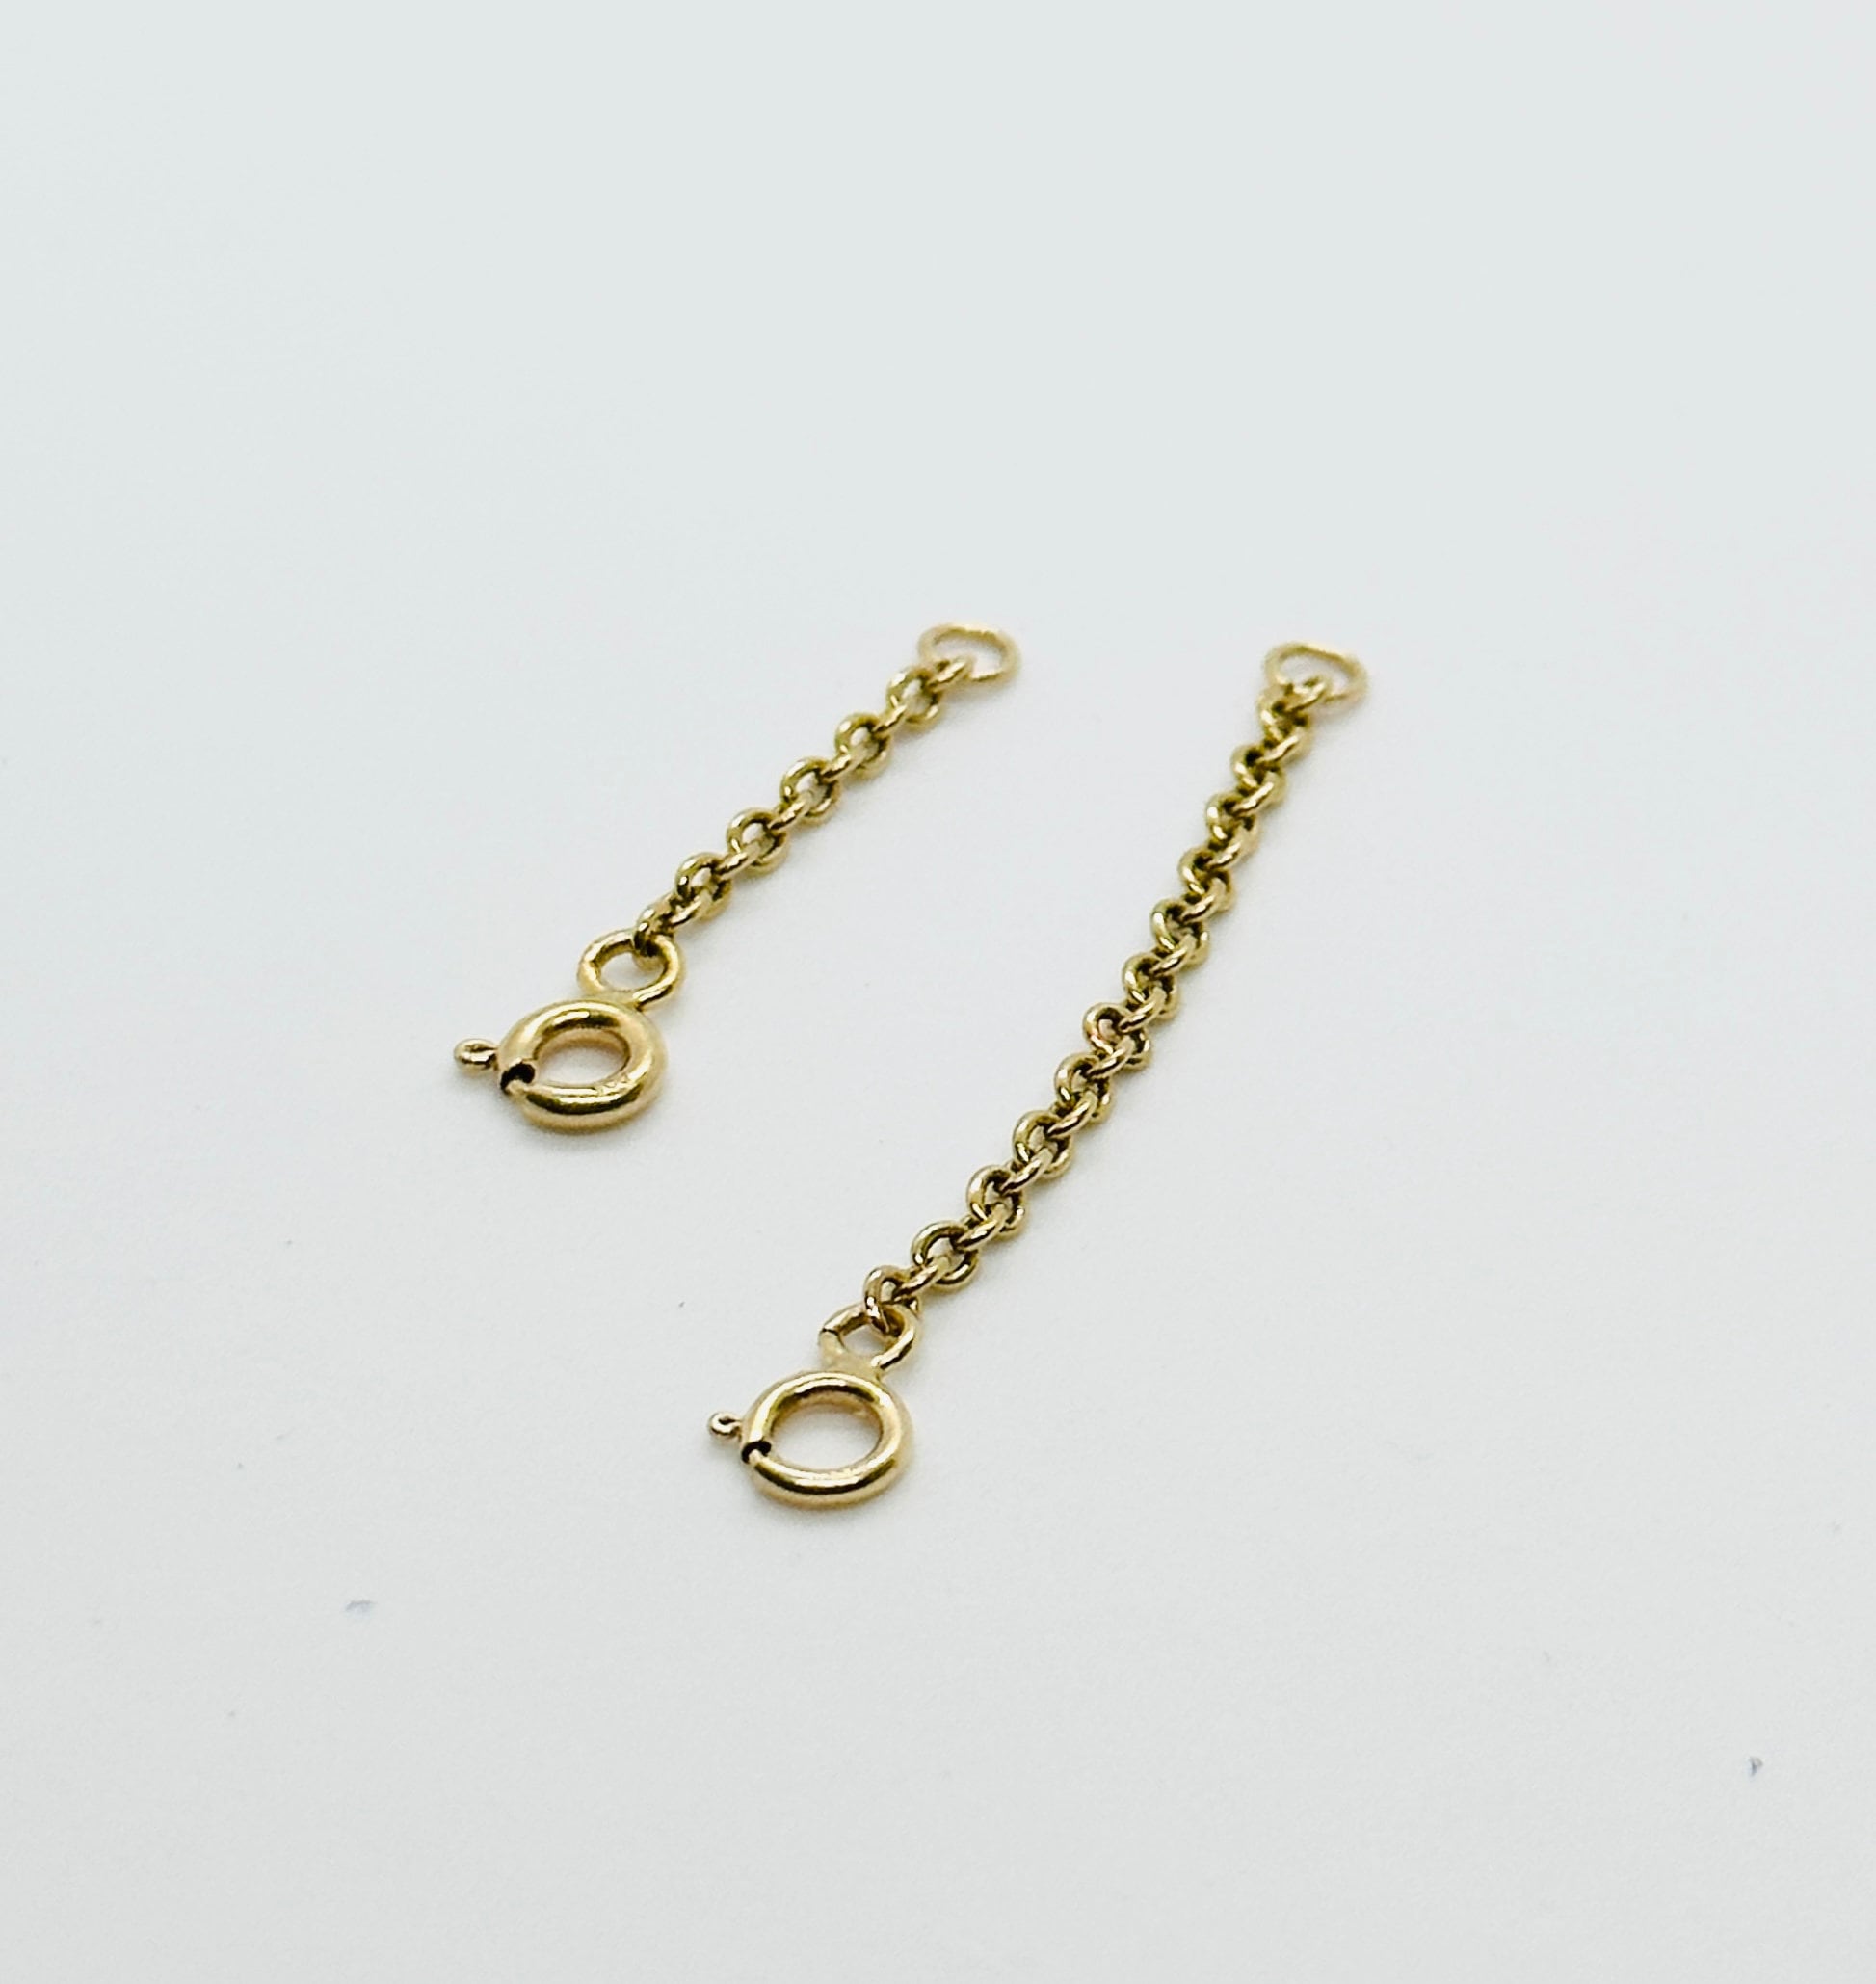 Gold Filled Wheat Chain Length Extender for Necklace or Bracelet, 1 Inch, 2  Inch, 3, 4 or 5 Inch Extension Lengthener Adjuster Resizer 